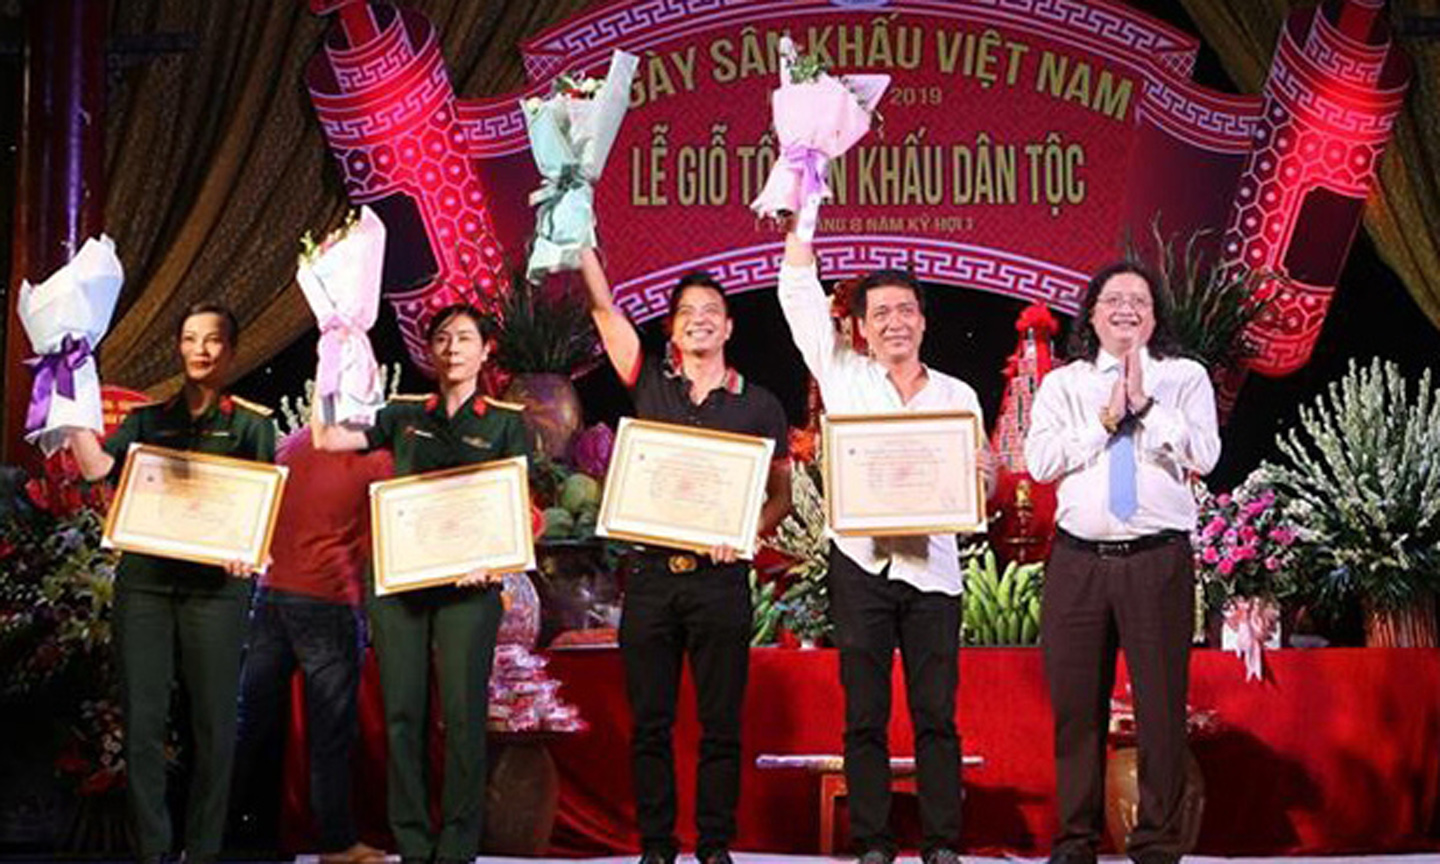 Outstanding composers are honoured at the ceremony. (Photo: VNA)